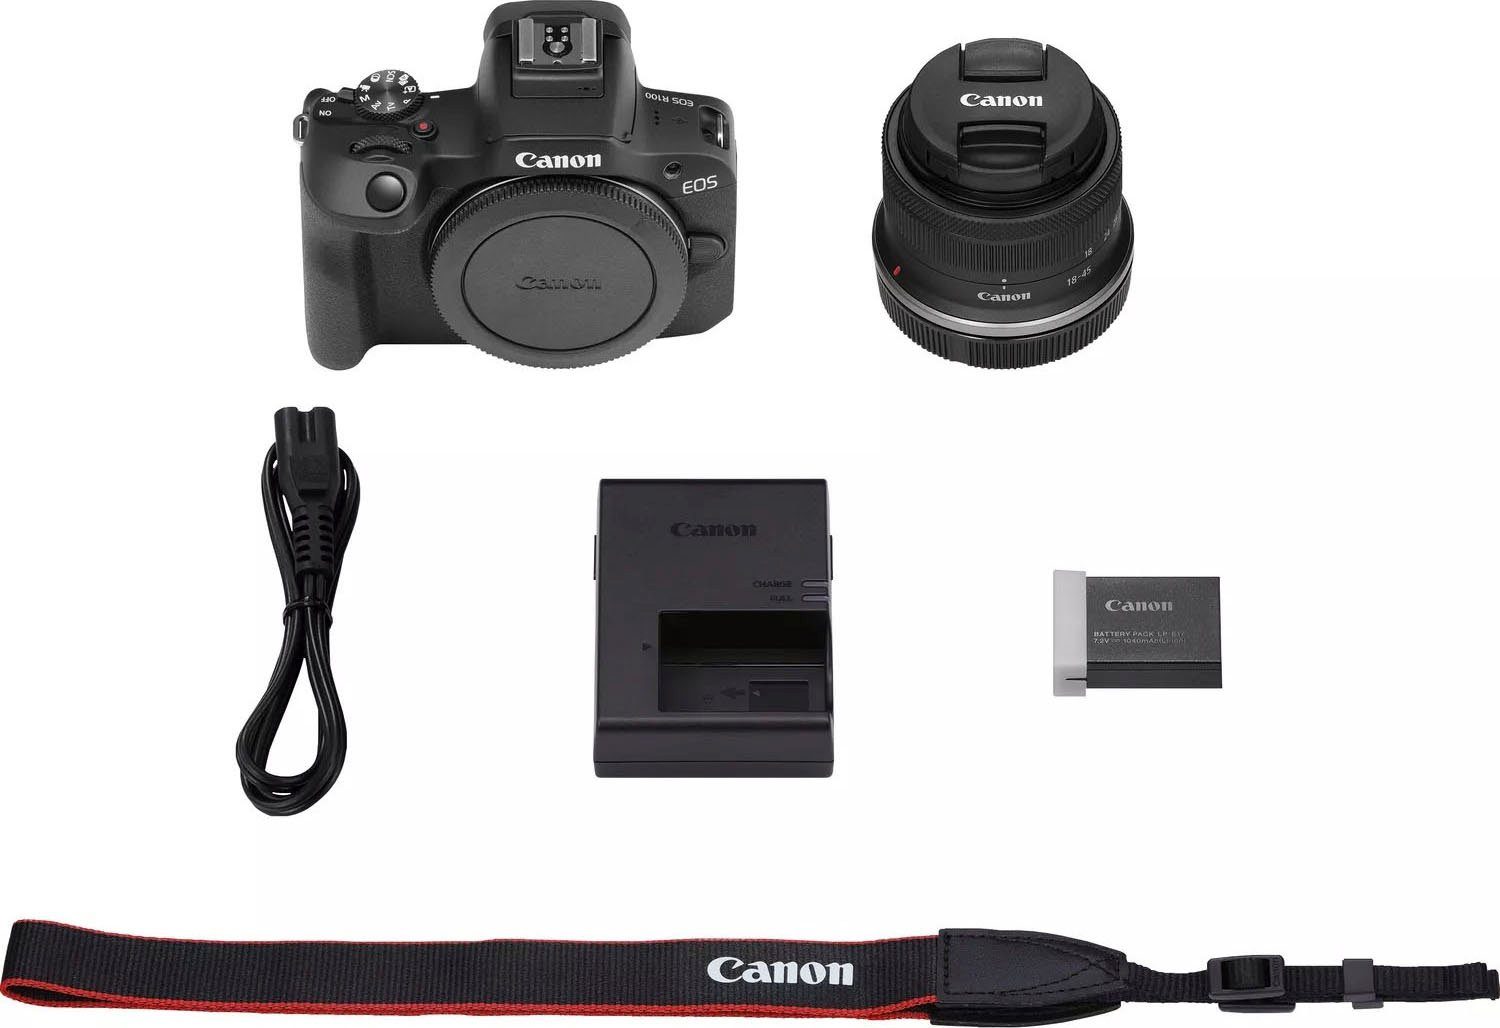 STM Canon R100 WLAN) 24,1 + Bluetooth, MP, STM, 18-45mm Kit F4.5-6.3 (RF-S F4.5-6.3 18-45mm IS RF-S EOS Systemkamera IS